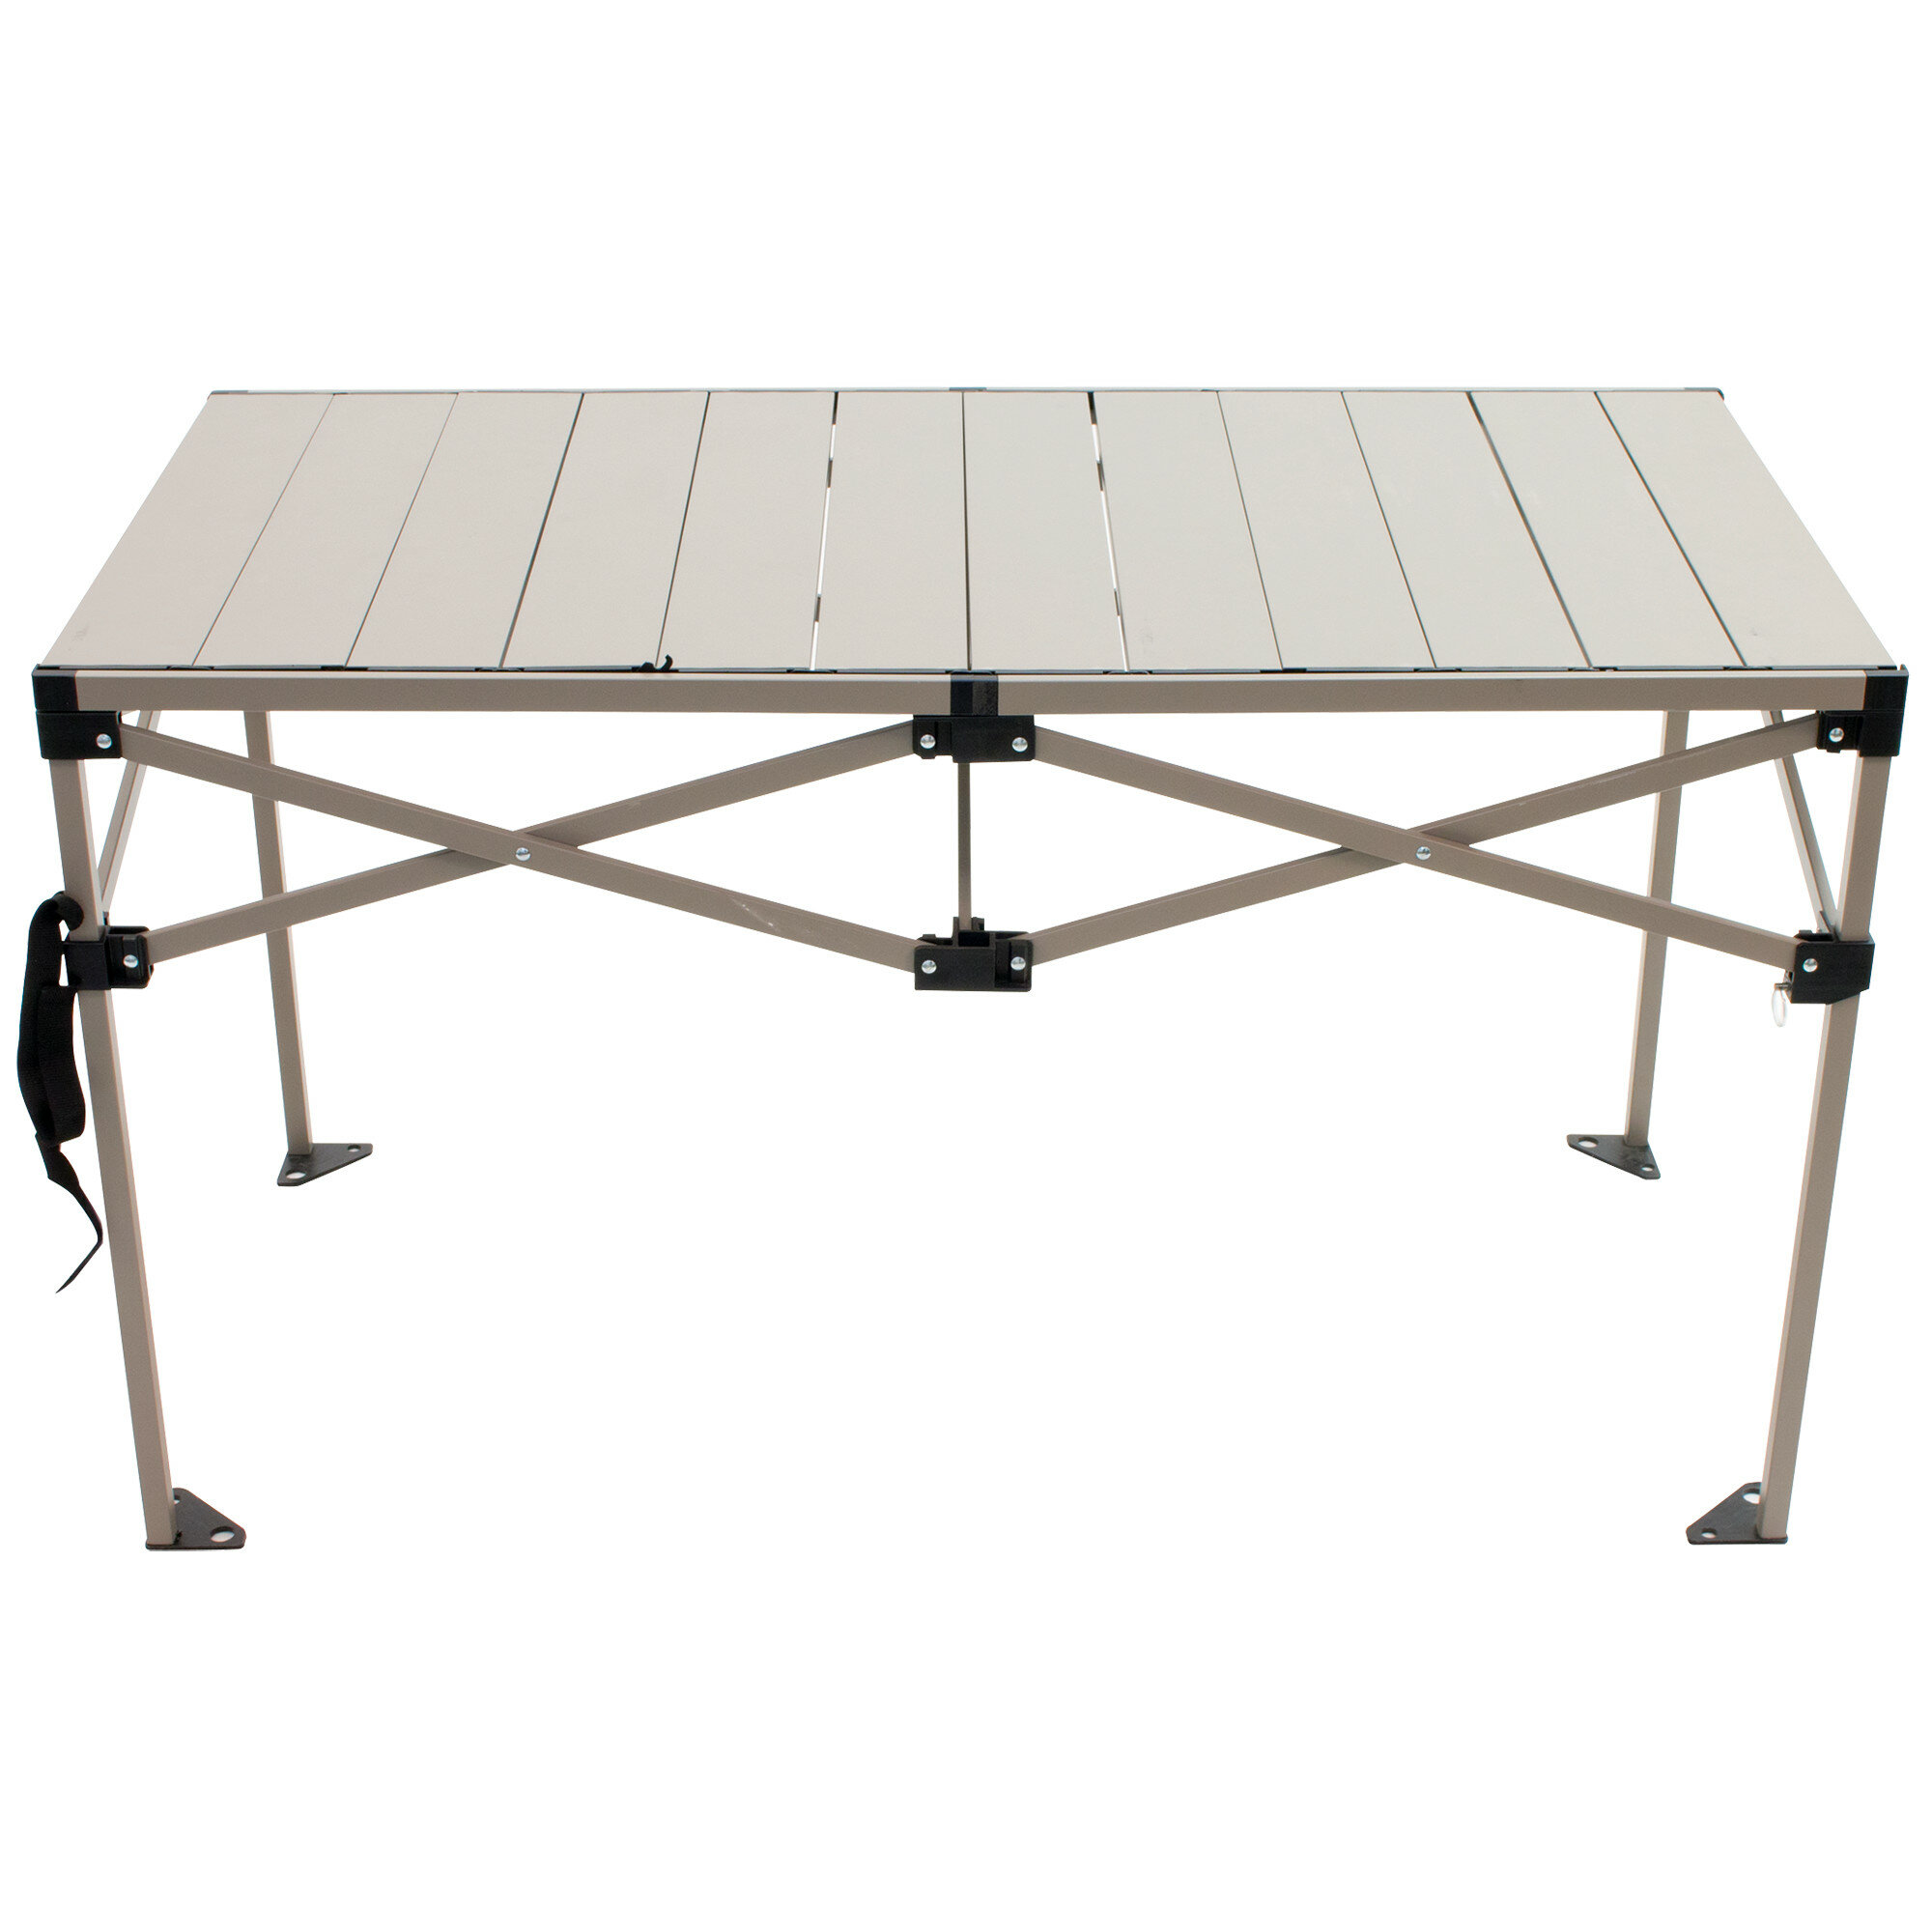 sturdy camping table